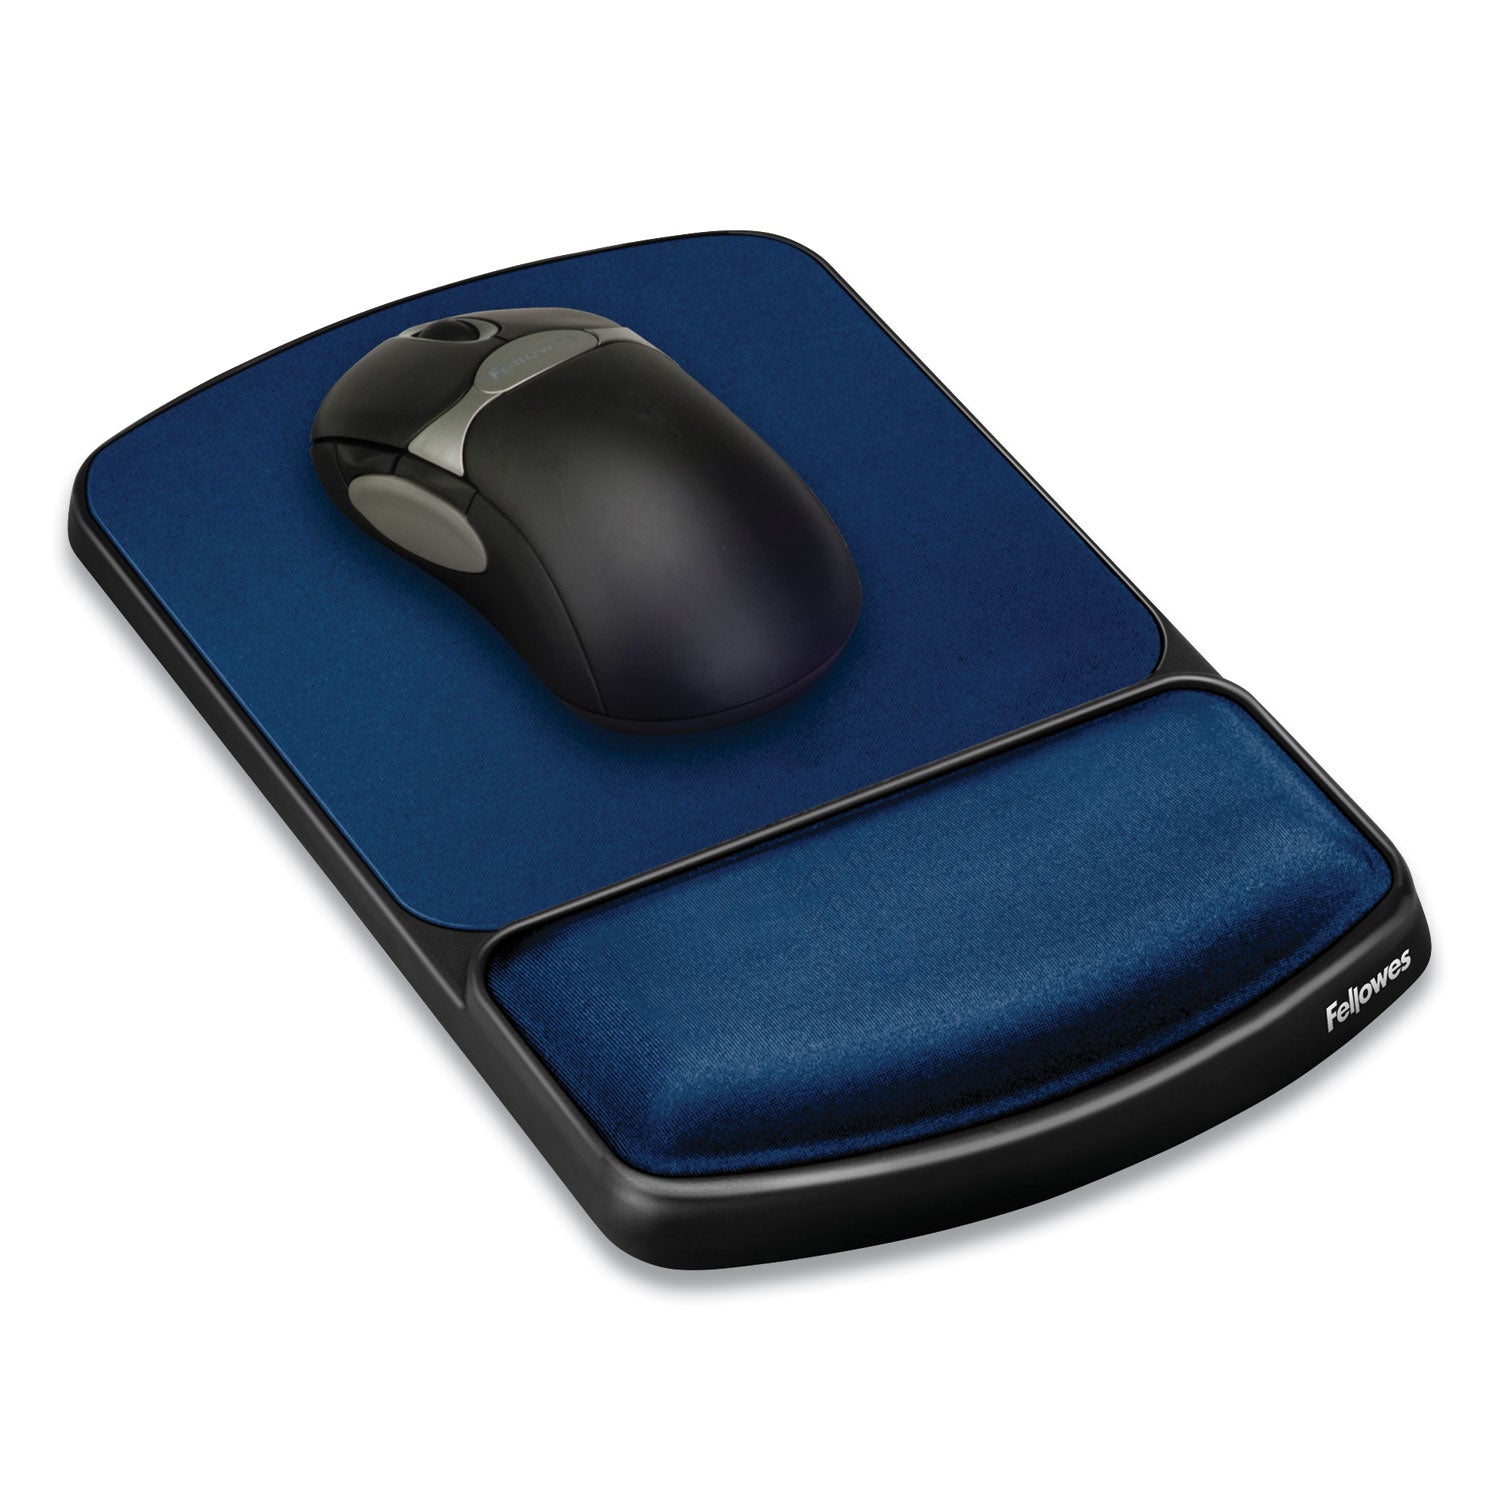 Gel Mouse Pad with Wrist Rest, 6.25 x 10.12, Black/Sapphire - 